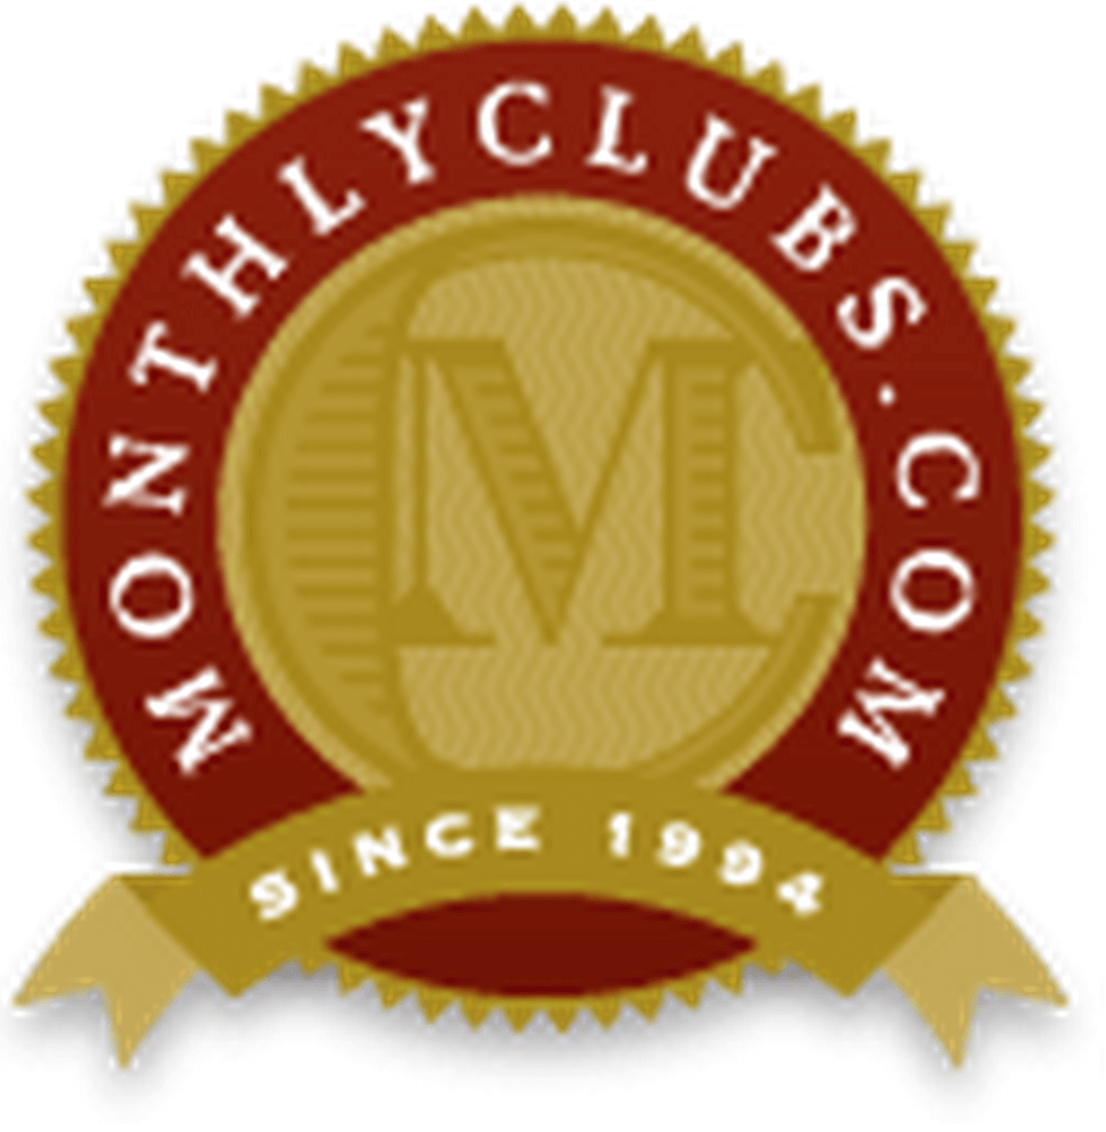 Monthly Clubs logo